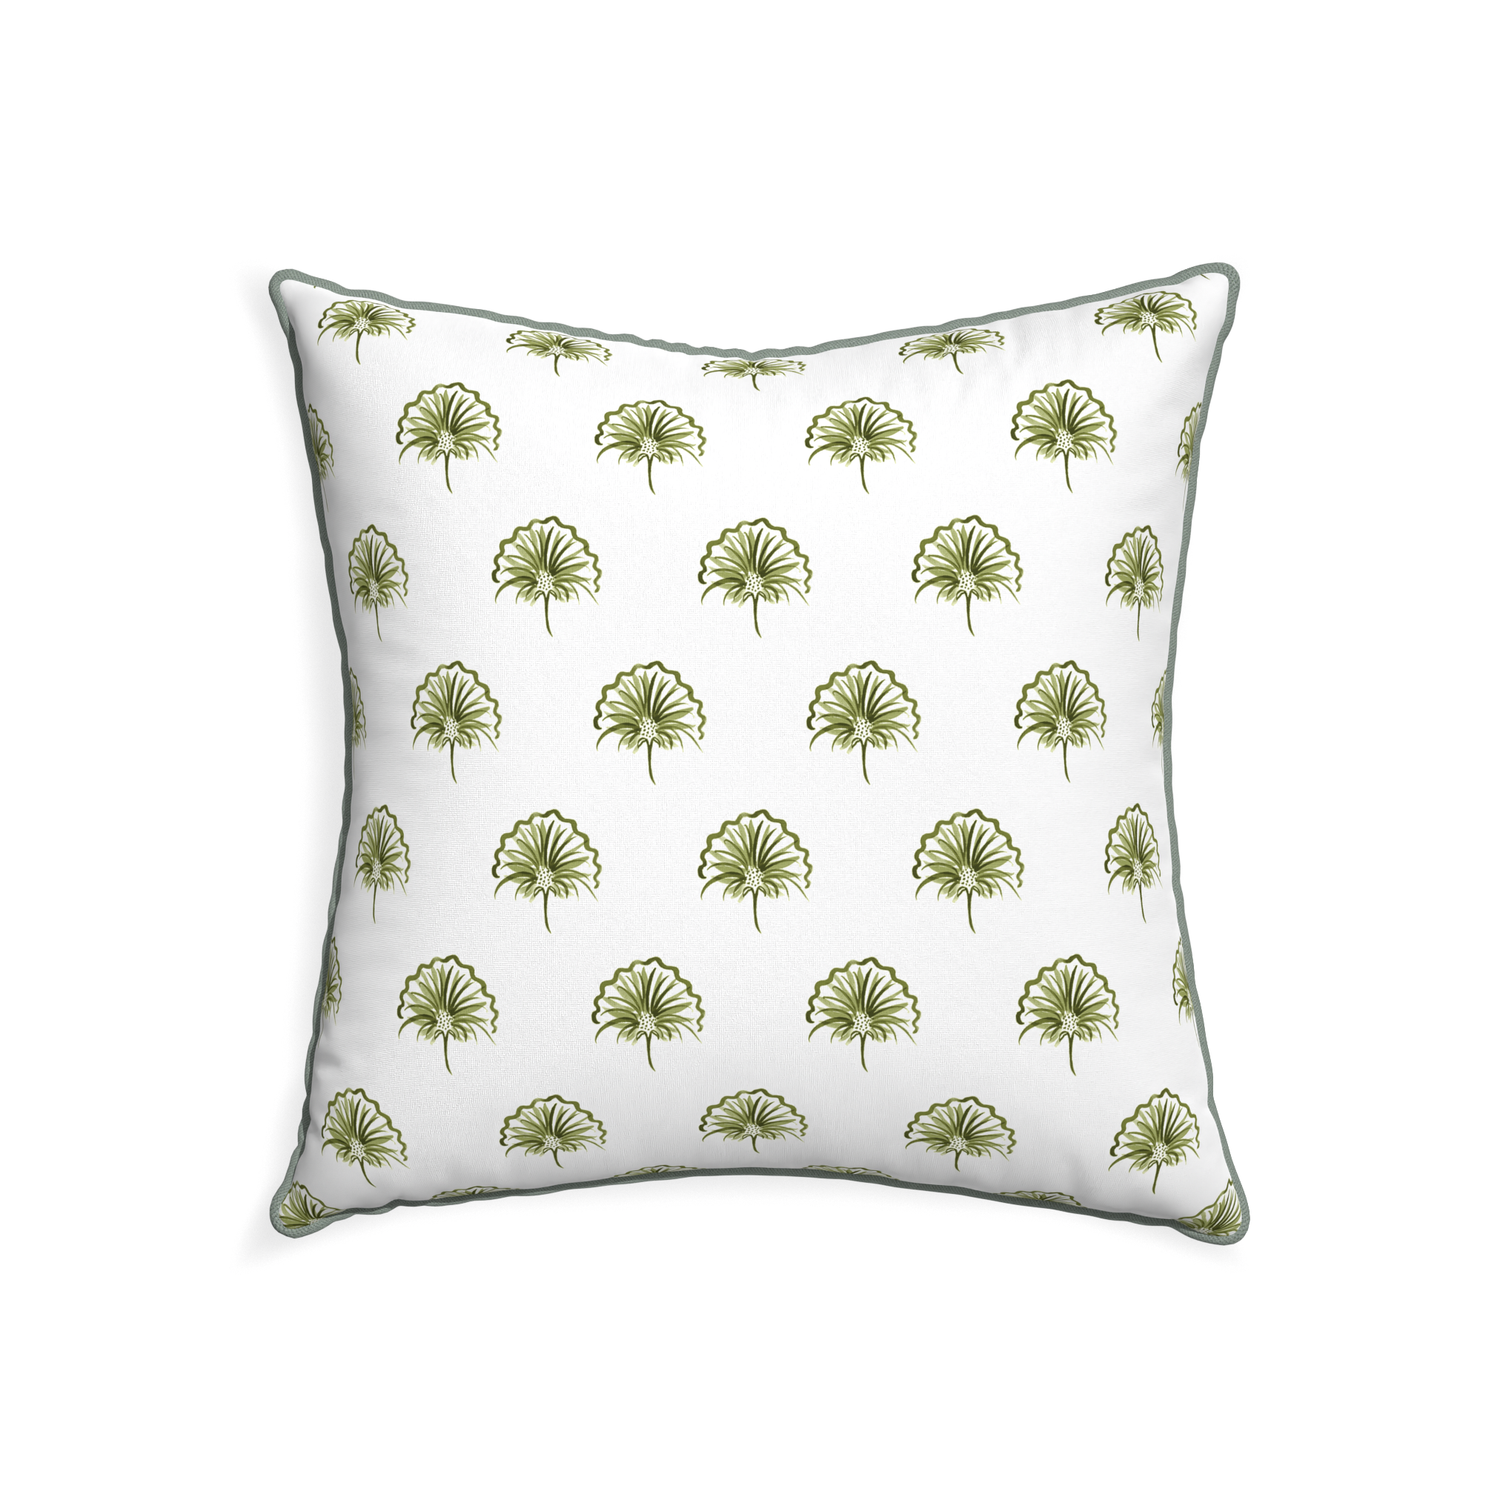 22-square penelope moss custom green floralpillow with sage piping on white background